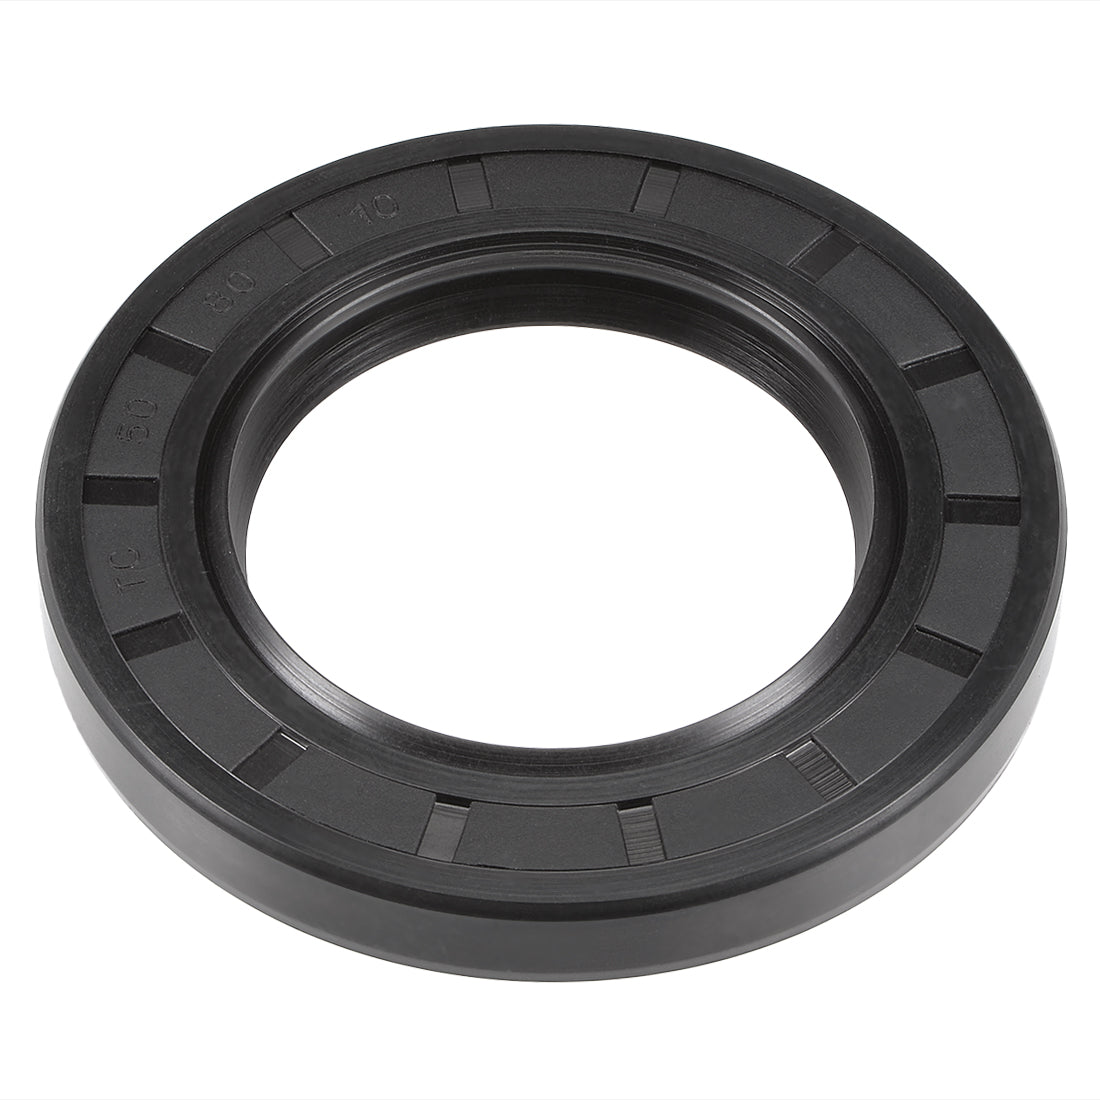 uxcell Uxcell Oil Seal, TC 50mm x 80mm x 10mm, Nitrile Rubber Cover Double Lip